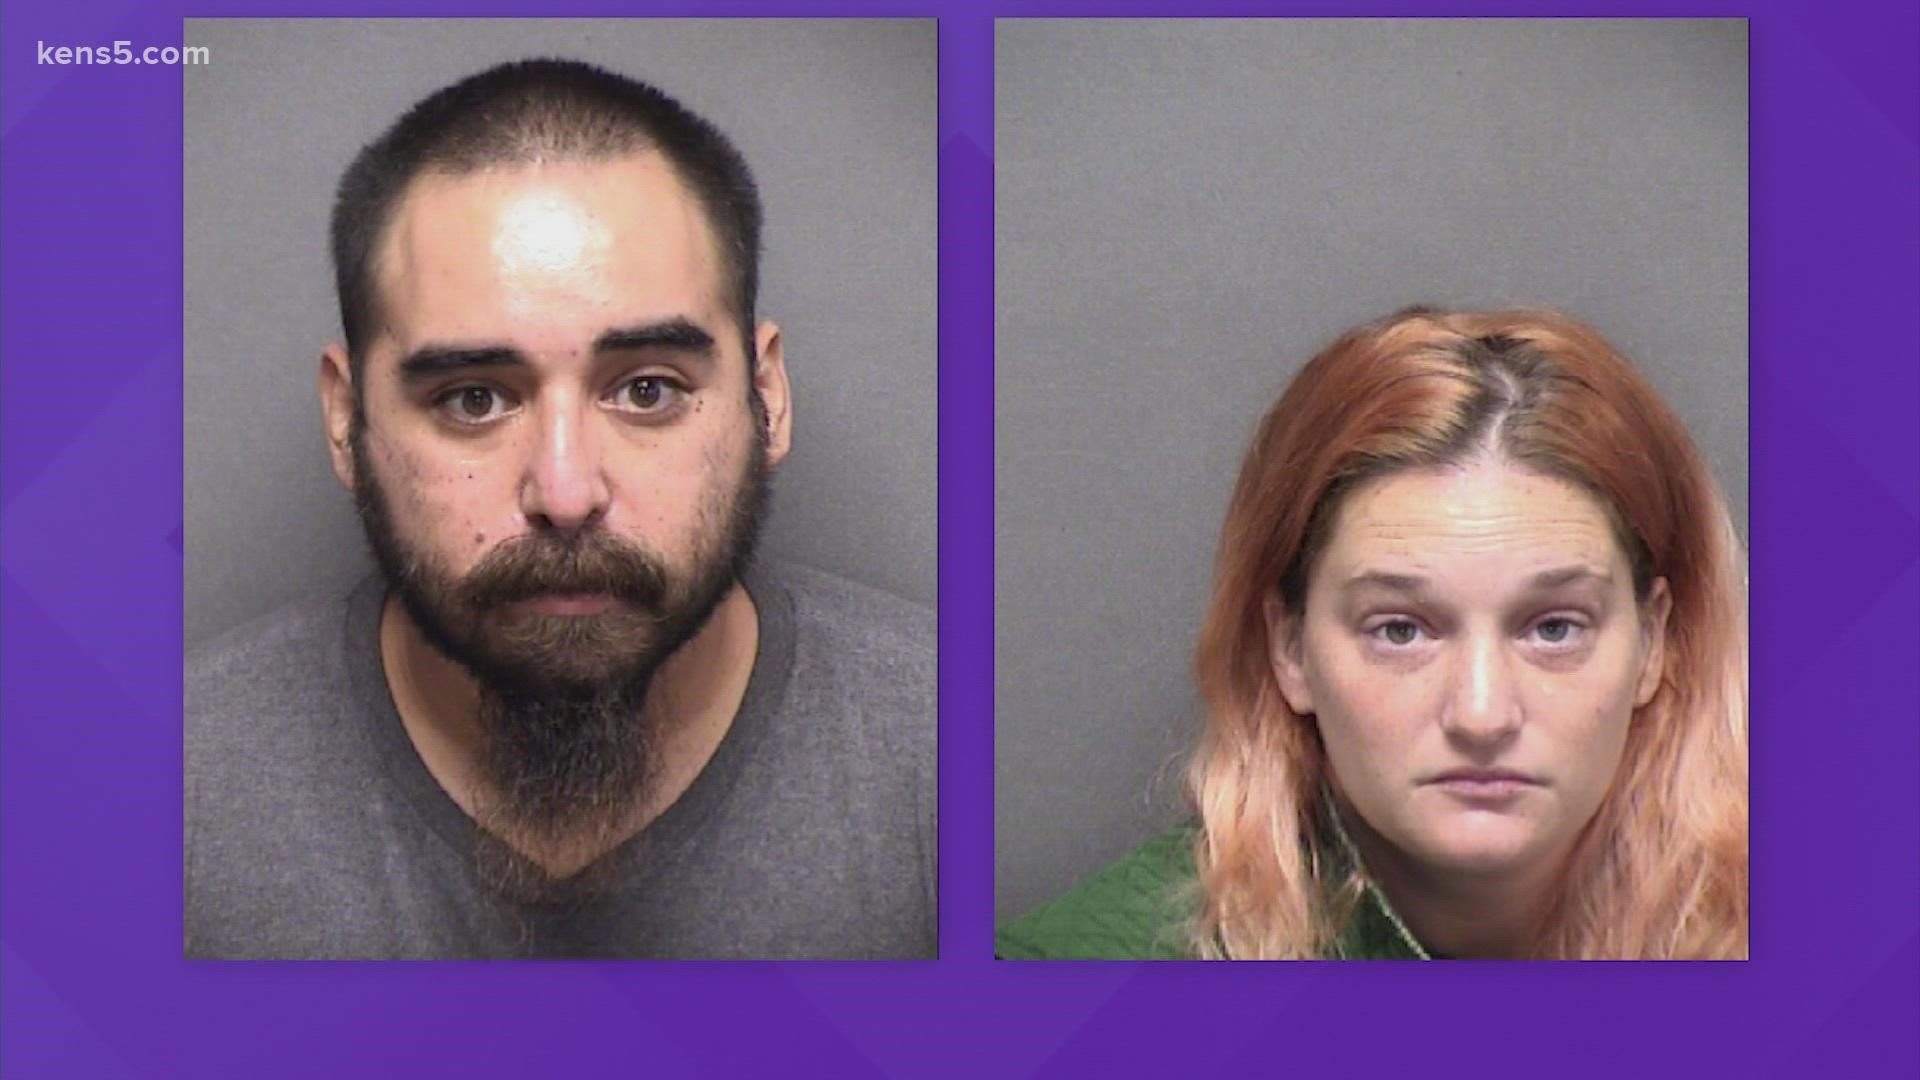 Couple facing several child sex charges, investigators fear there may be more victims kens5 picture